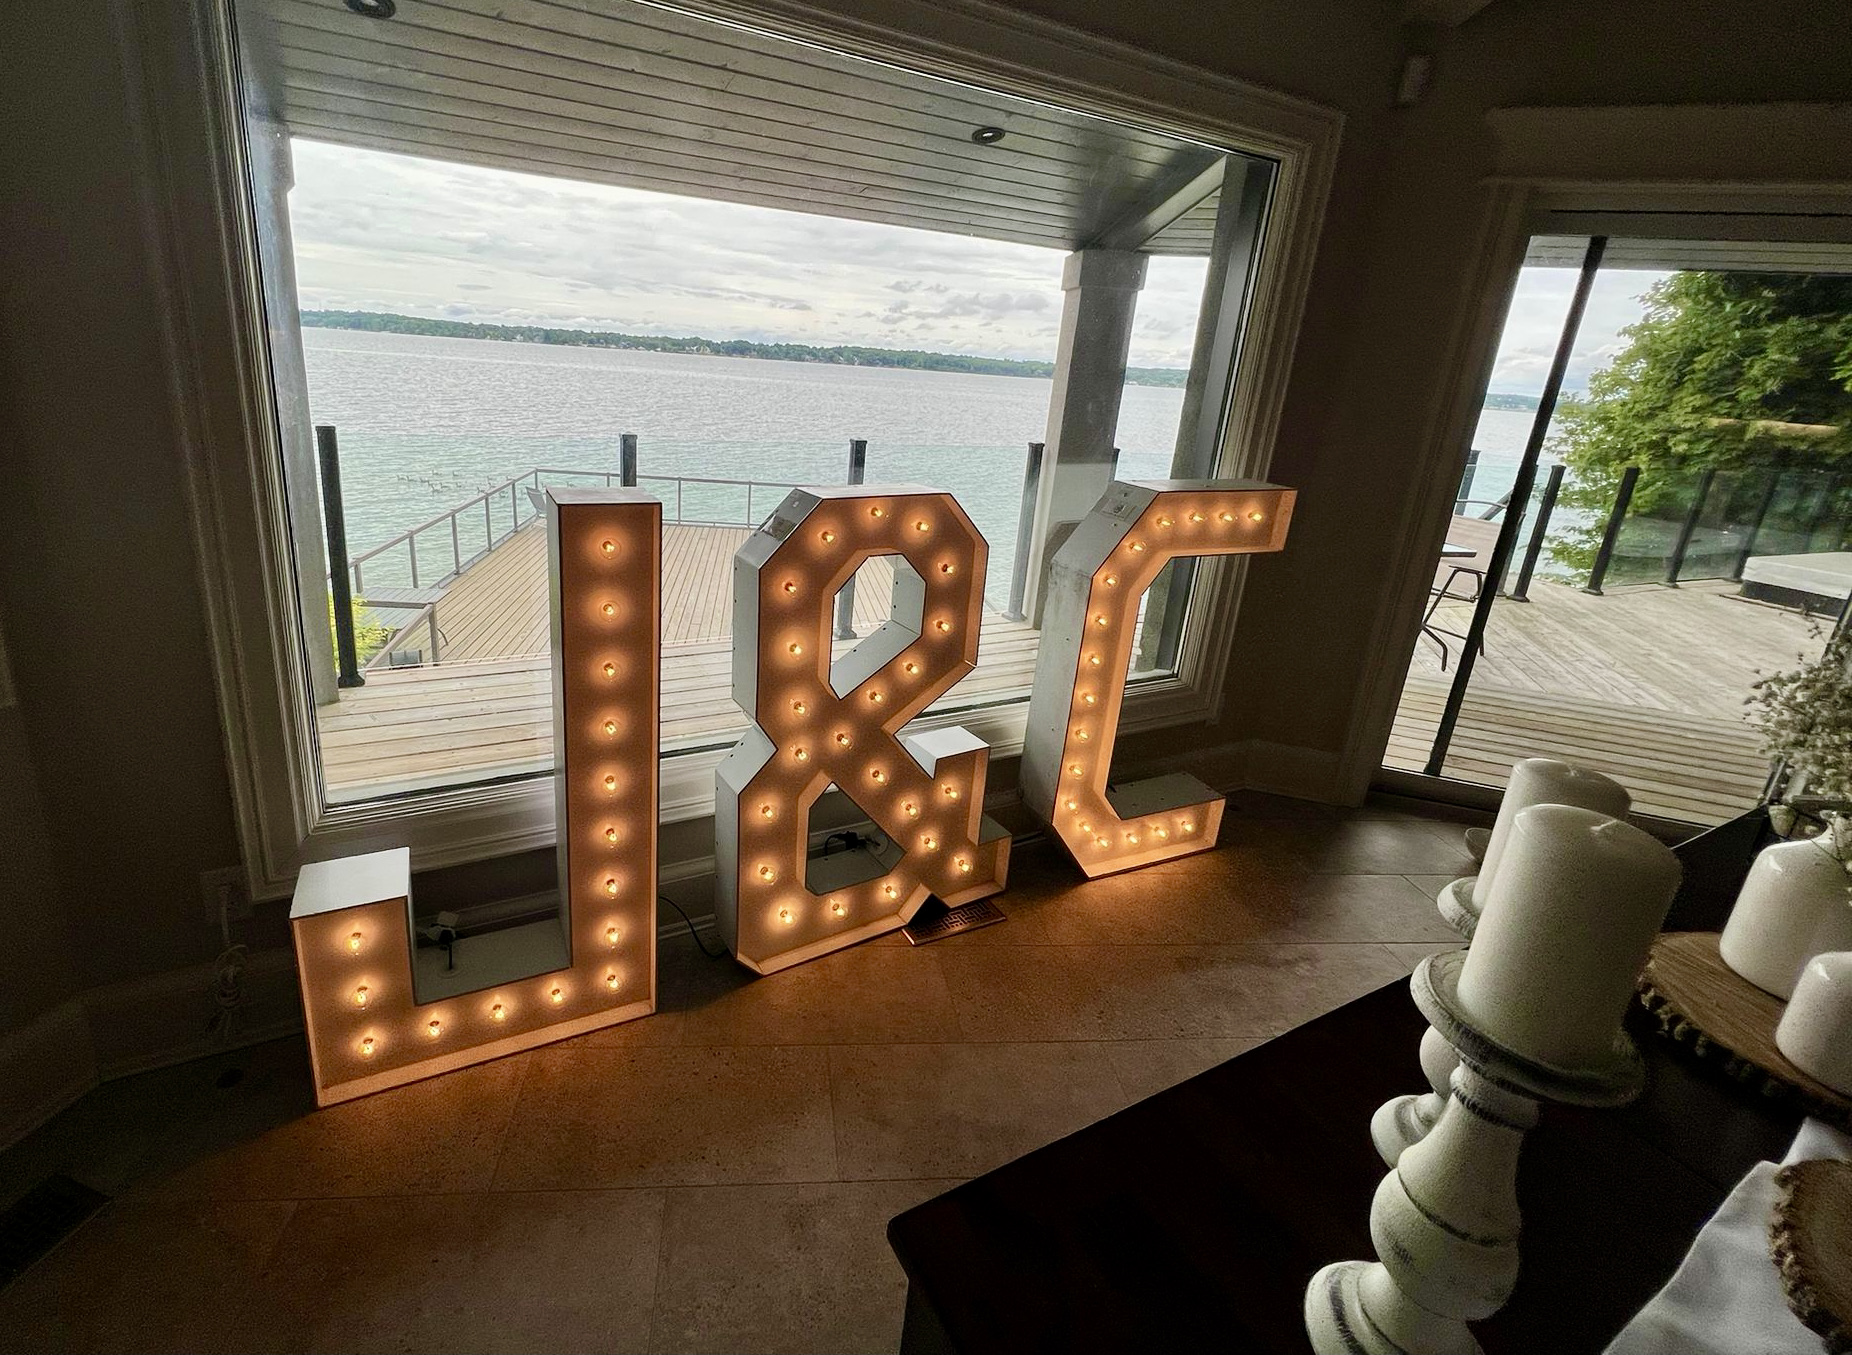 Lindsay Marquee Letter Rentals